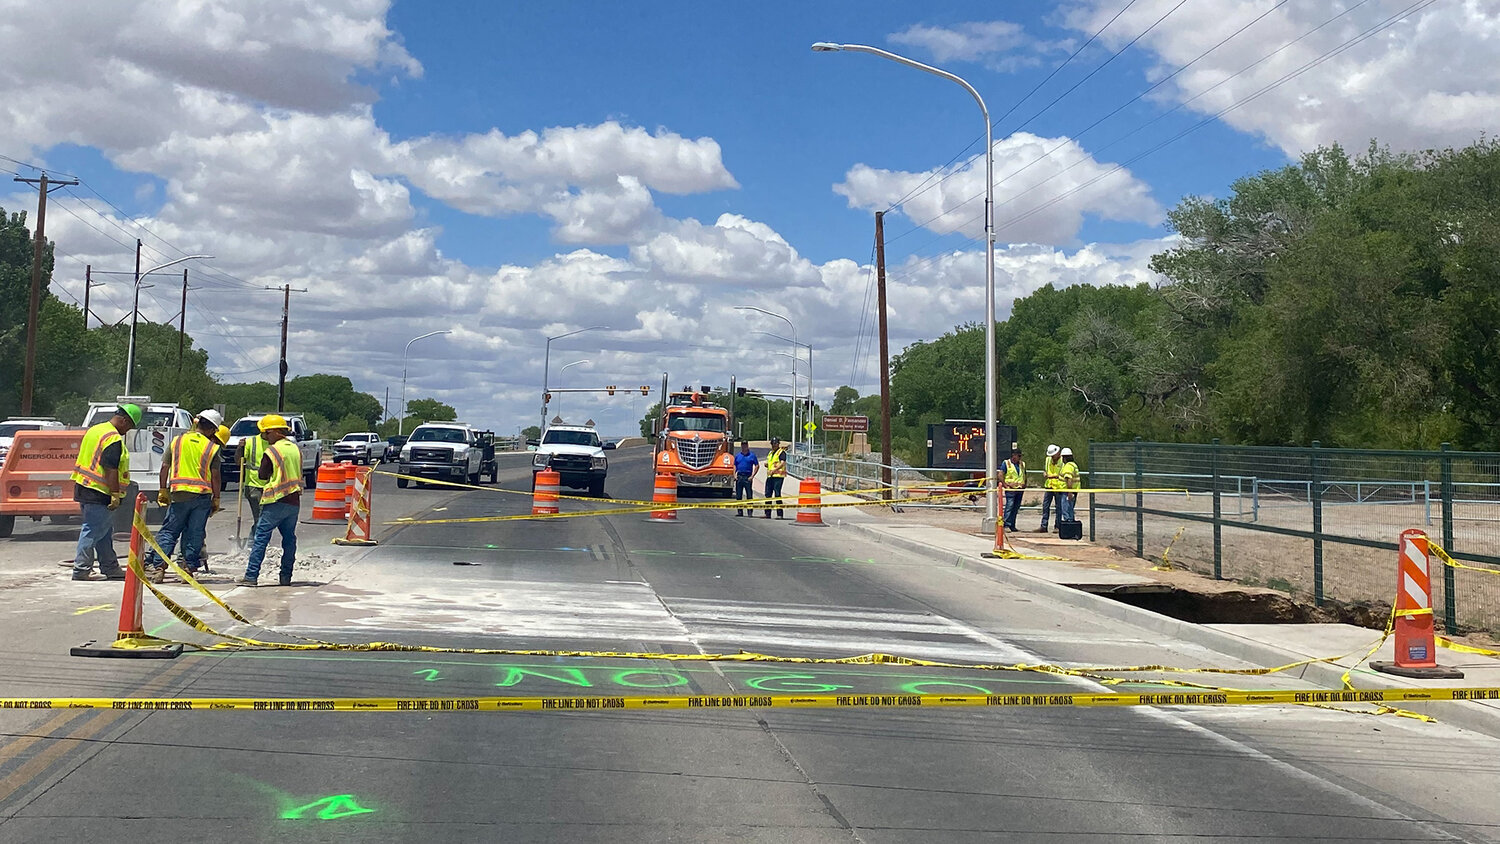 NM DOT workers added cones, warning tape and bright green "NO GO" paint to an area around a sinkhole that briefly trapped two pedestrians over the weekend.